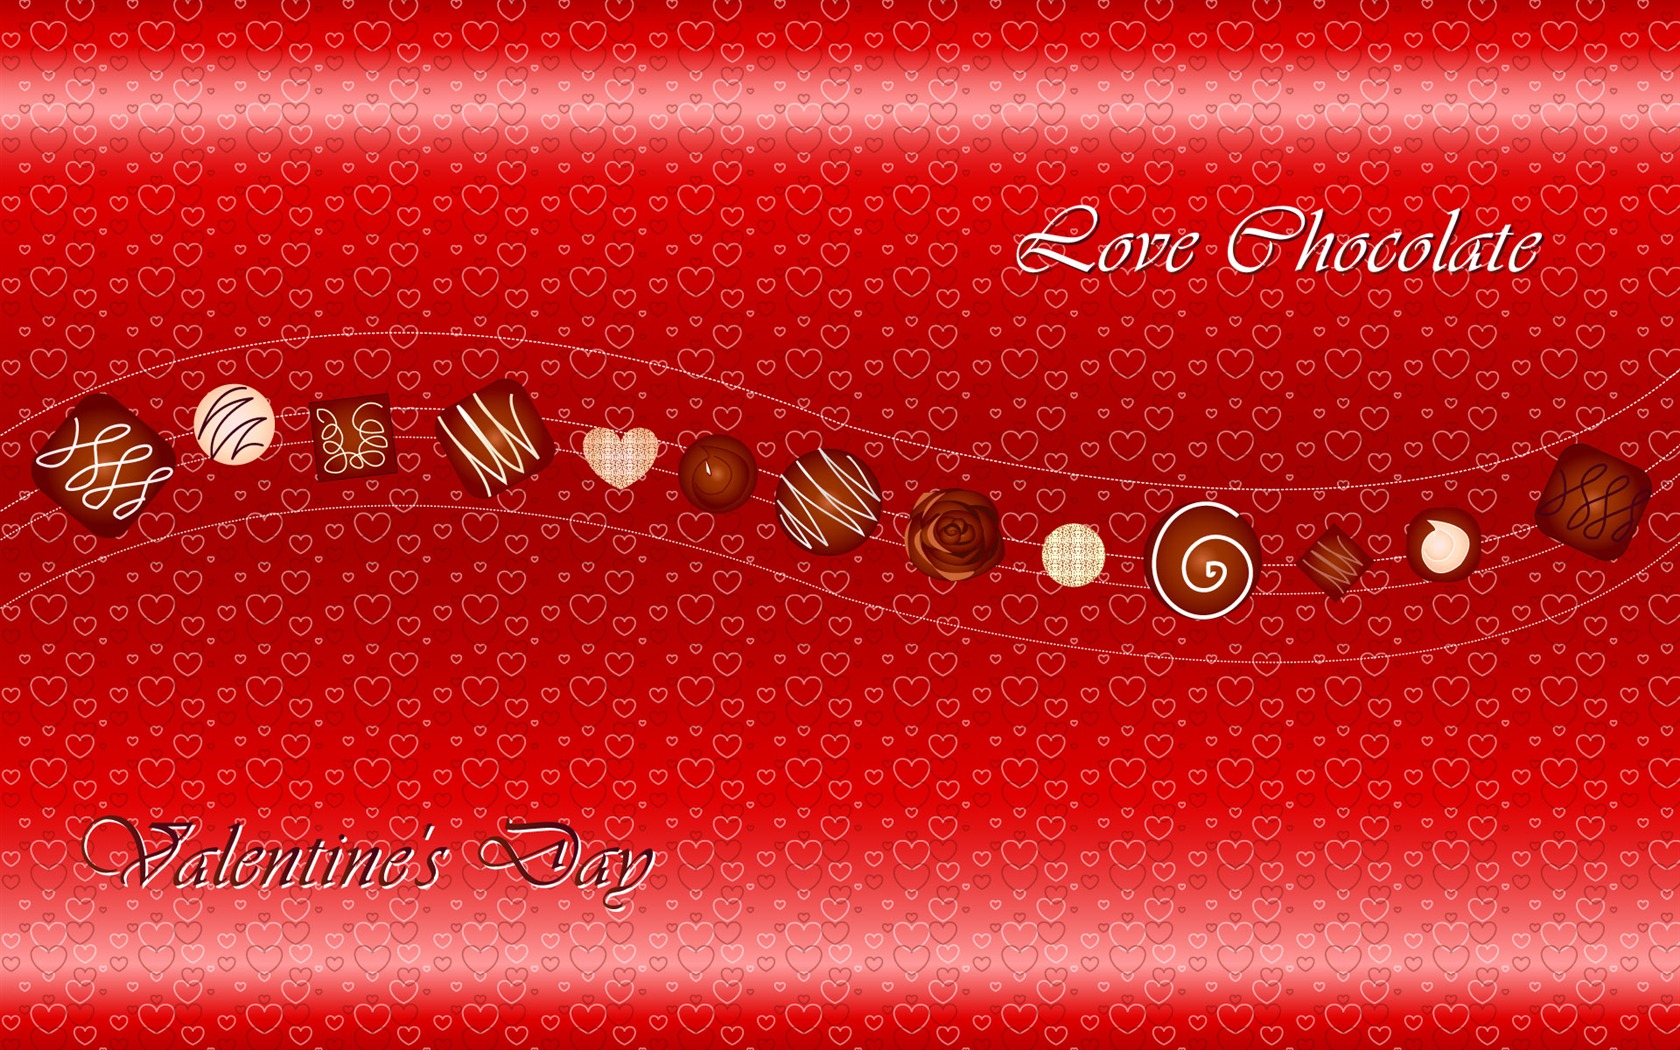 Valentine's Day Theme Wallpapers (1) #2 - 1680x1050